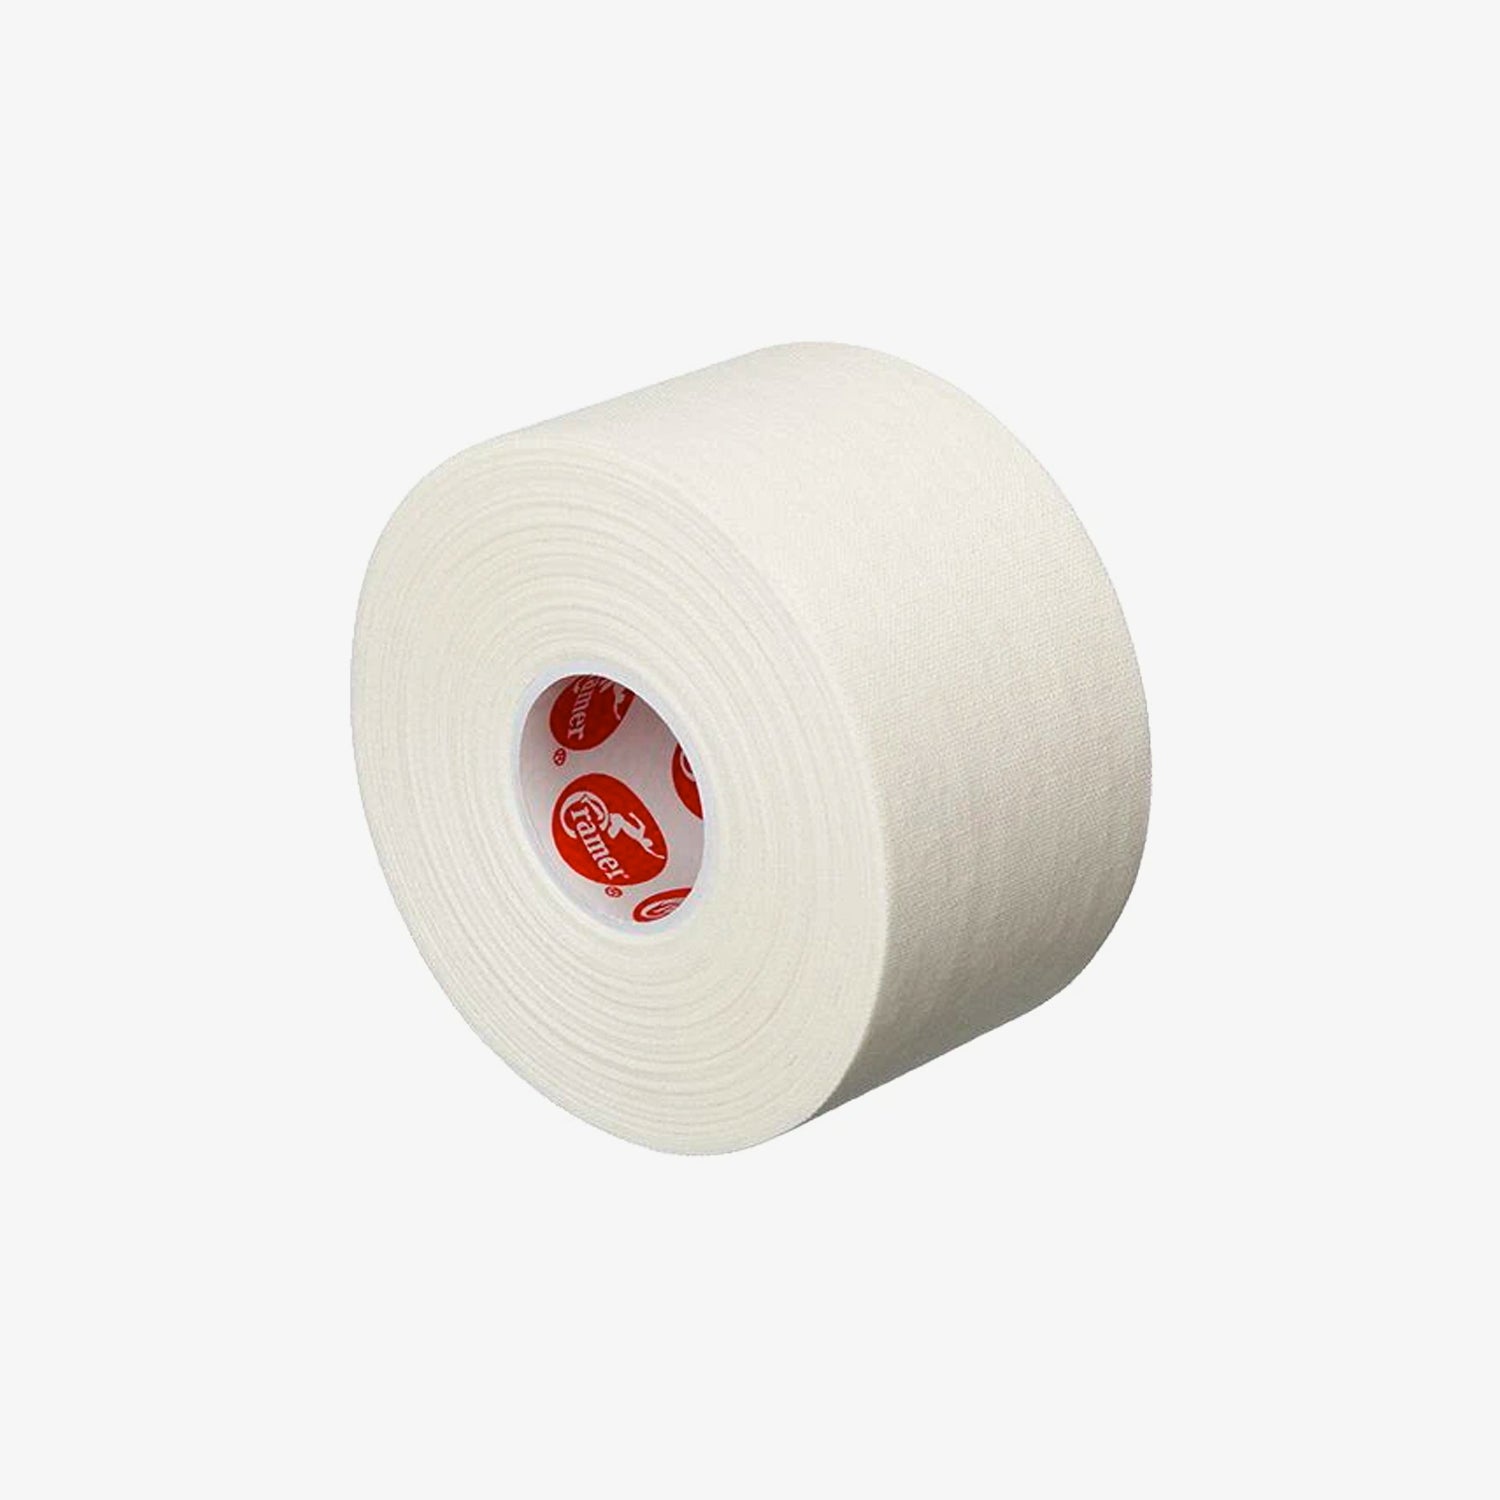 Cramer 750 Athletic Trainers Tape White 1.5" (1 Roll)